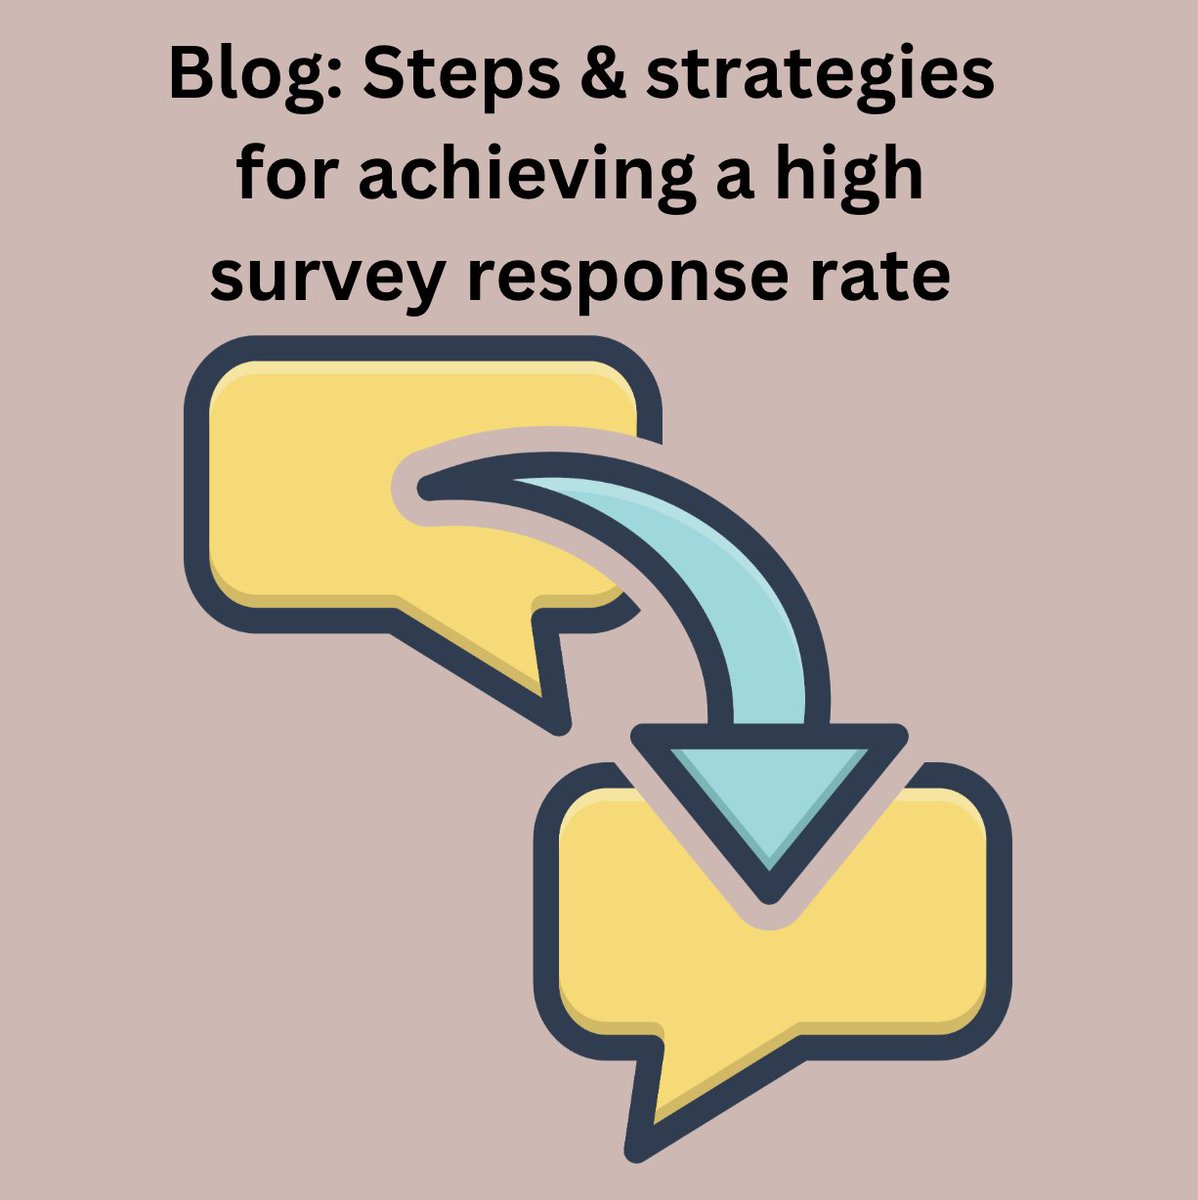 MarzanoResearch: RT @relnw: BLOG: Pressing the send button on a survey might seem like an endpoint. But to truly gain the information you need, some of the hardest and most strategic work often starts there. Read more to learn about survey strategies you…